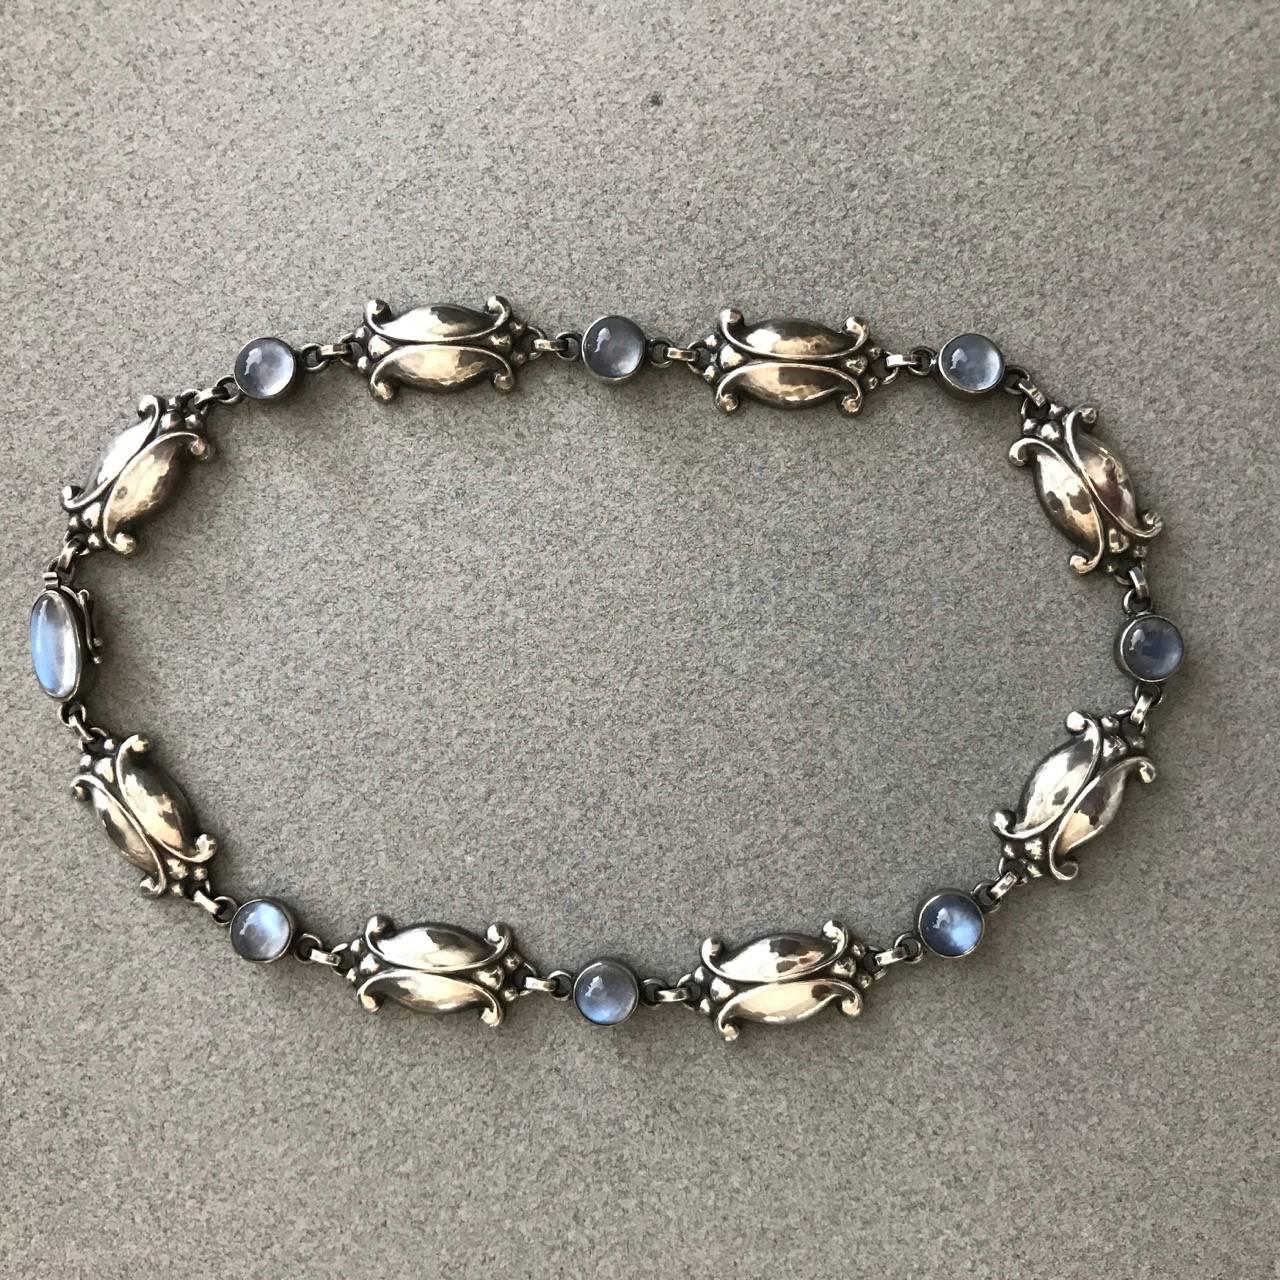 Georg Jensen Vintage Sterling Silver Necklace No. 15 with Moonstones

This is a gorgeous example of a necklace that can be worn day or evening. Beautiful patina on the sterling silver and the moonstones have a bright, opalescence quality. The links